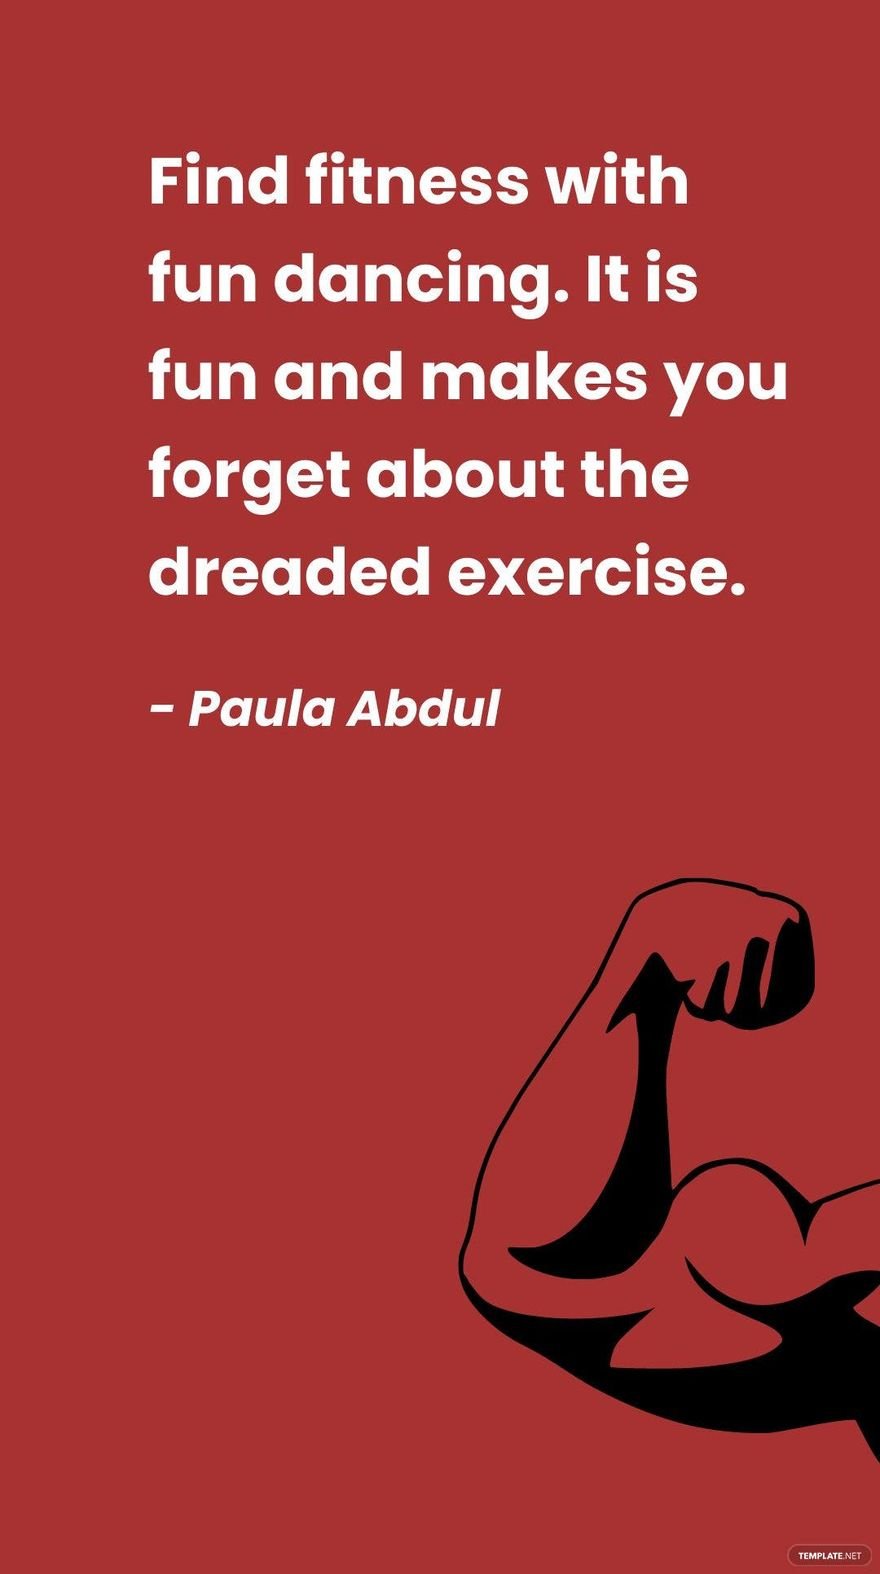 Paula Abdul - Find fitness with fun dancing. It is fun and makes you forget about the dreaded exercise. - Paula Abdul